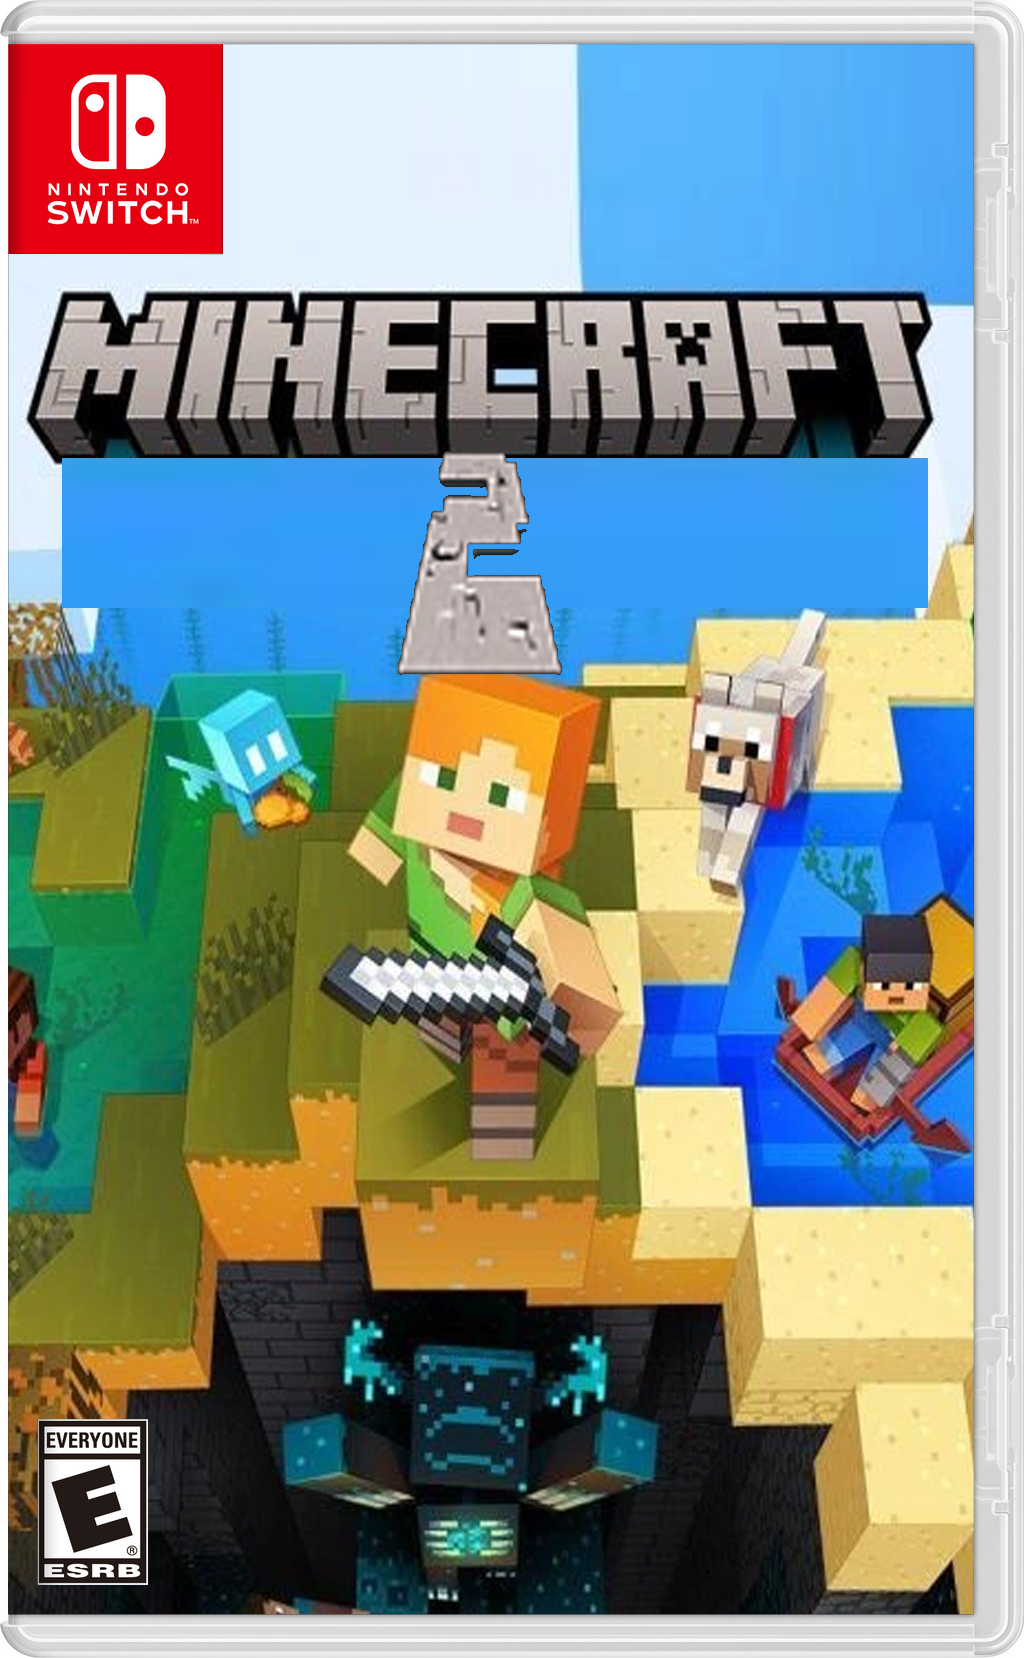 Minecraft 2 Official Game Released, Minecraft 2